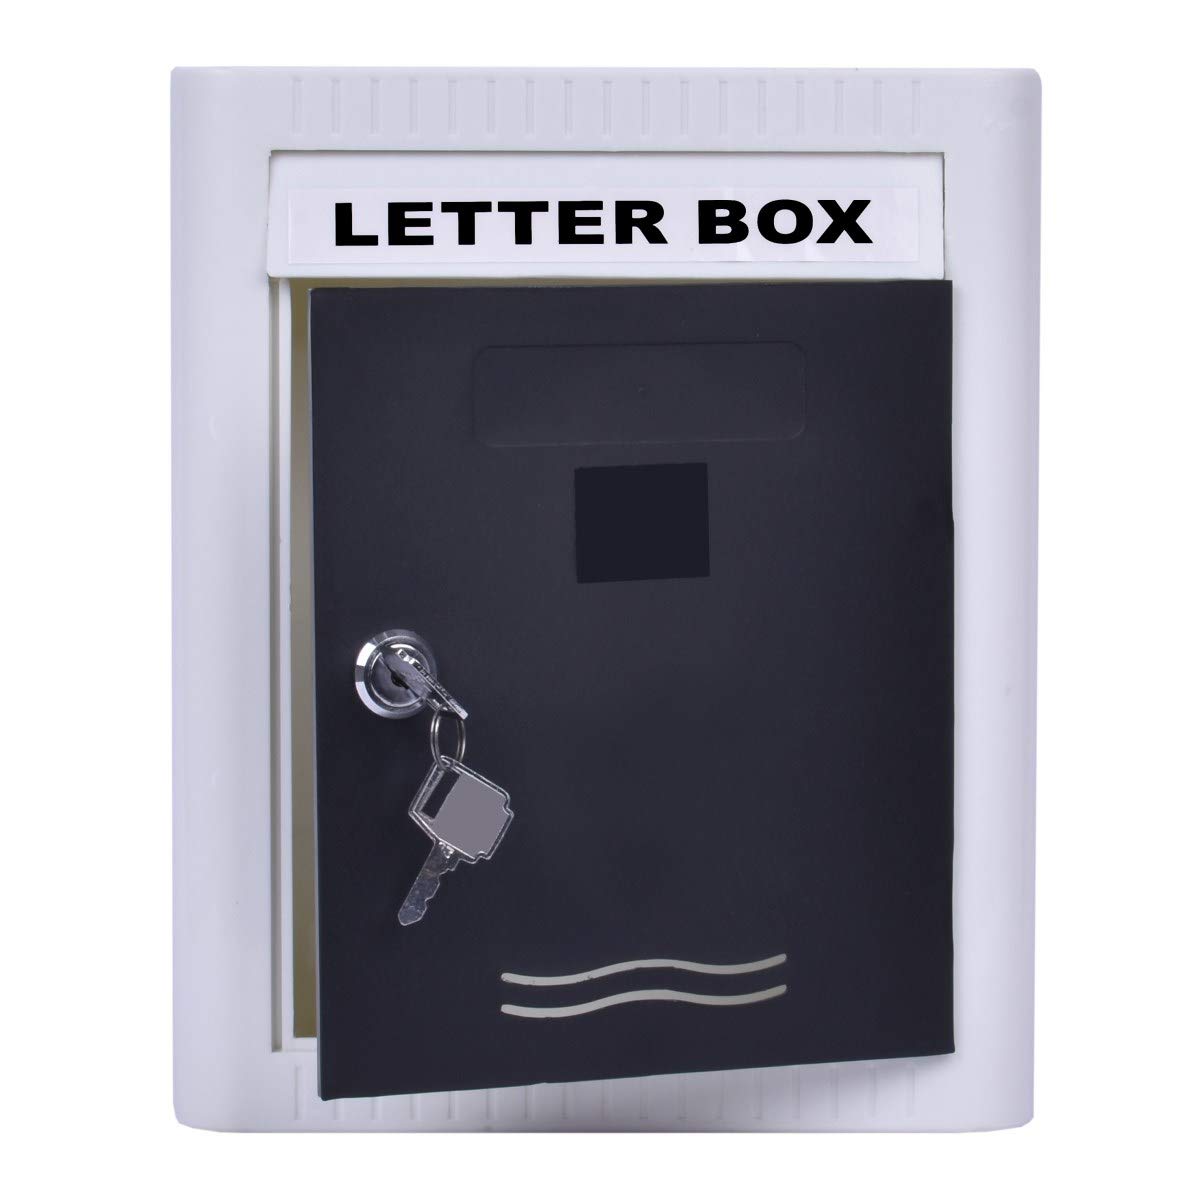 Plantex Virgin Plastic Wall Mount A4 Letter Box - Mail Box/Outdoor Mailboxes Home Decoration with Key Lock (Black & White)